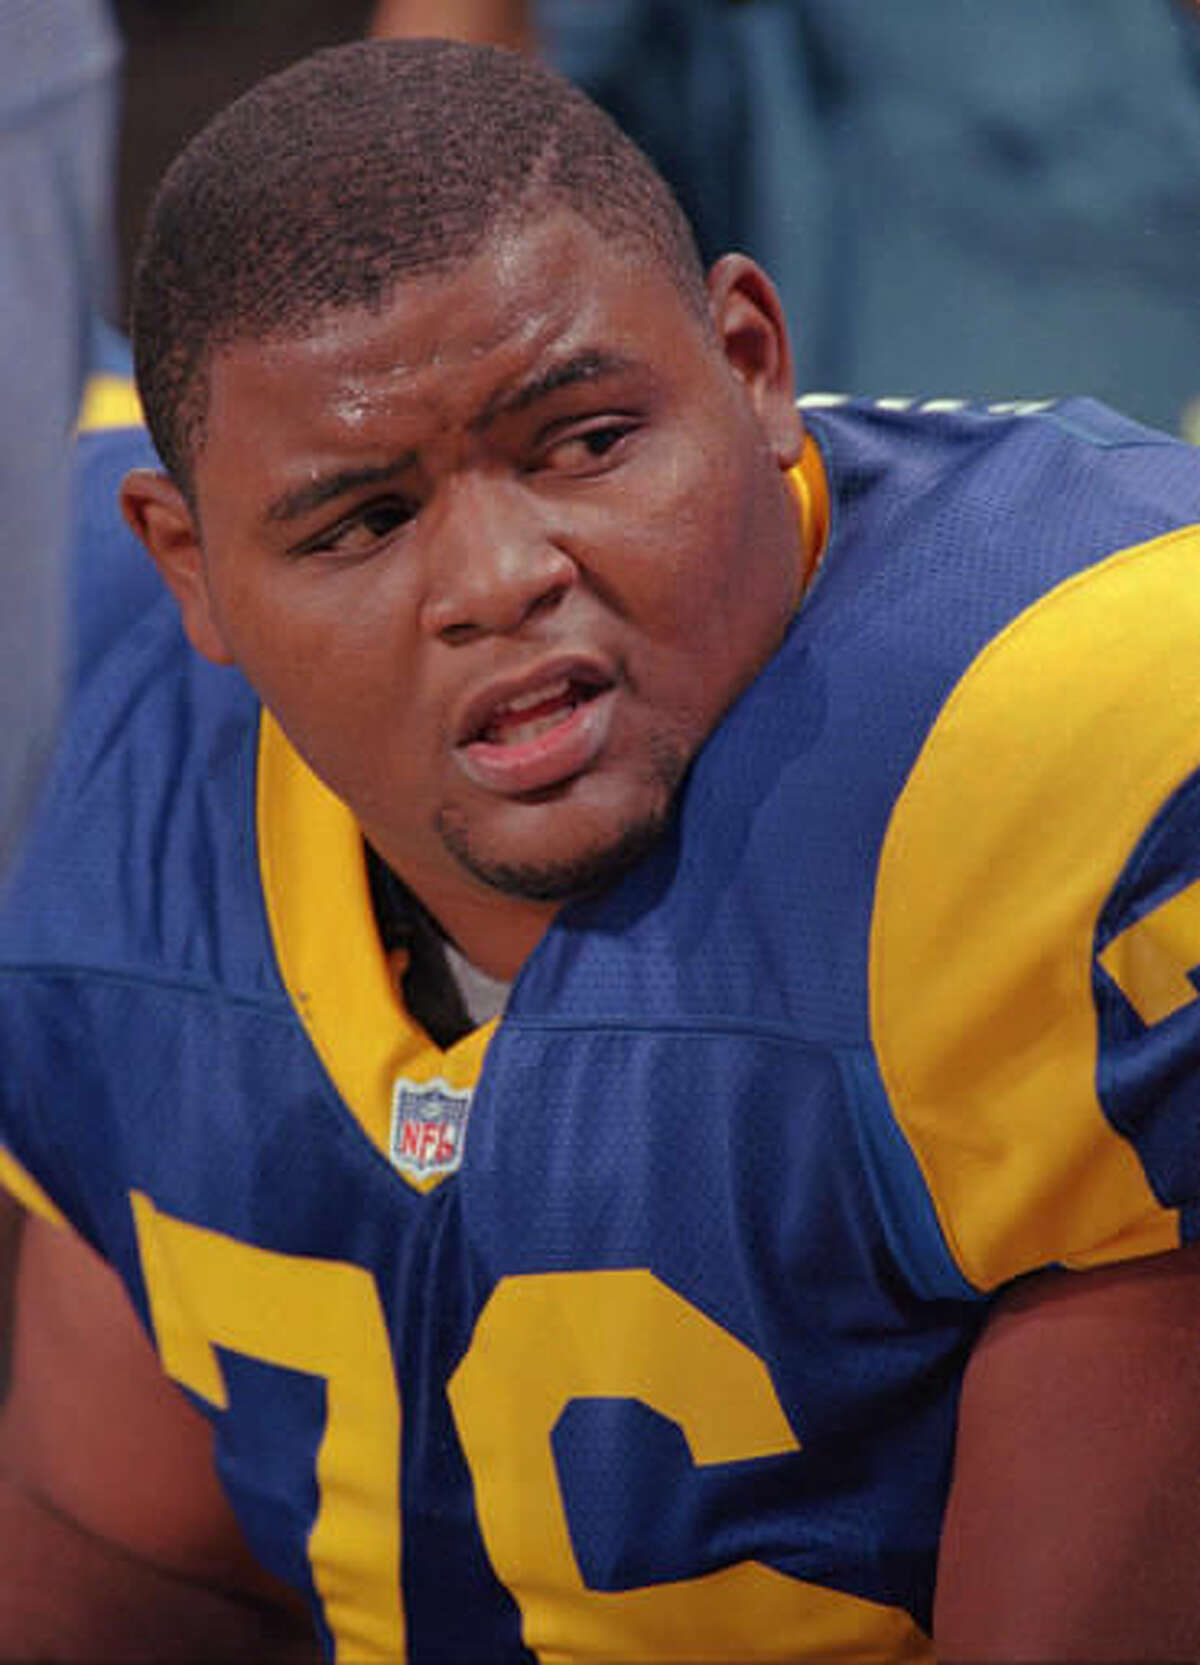 Rams uniforms: Which throwback jersey should make a comeback? - Turf Show  Times